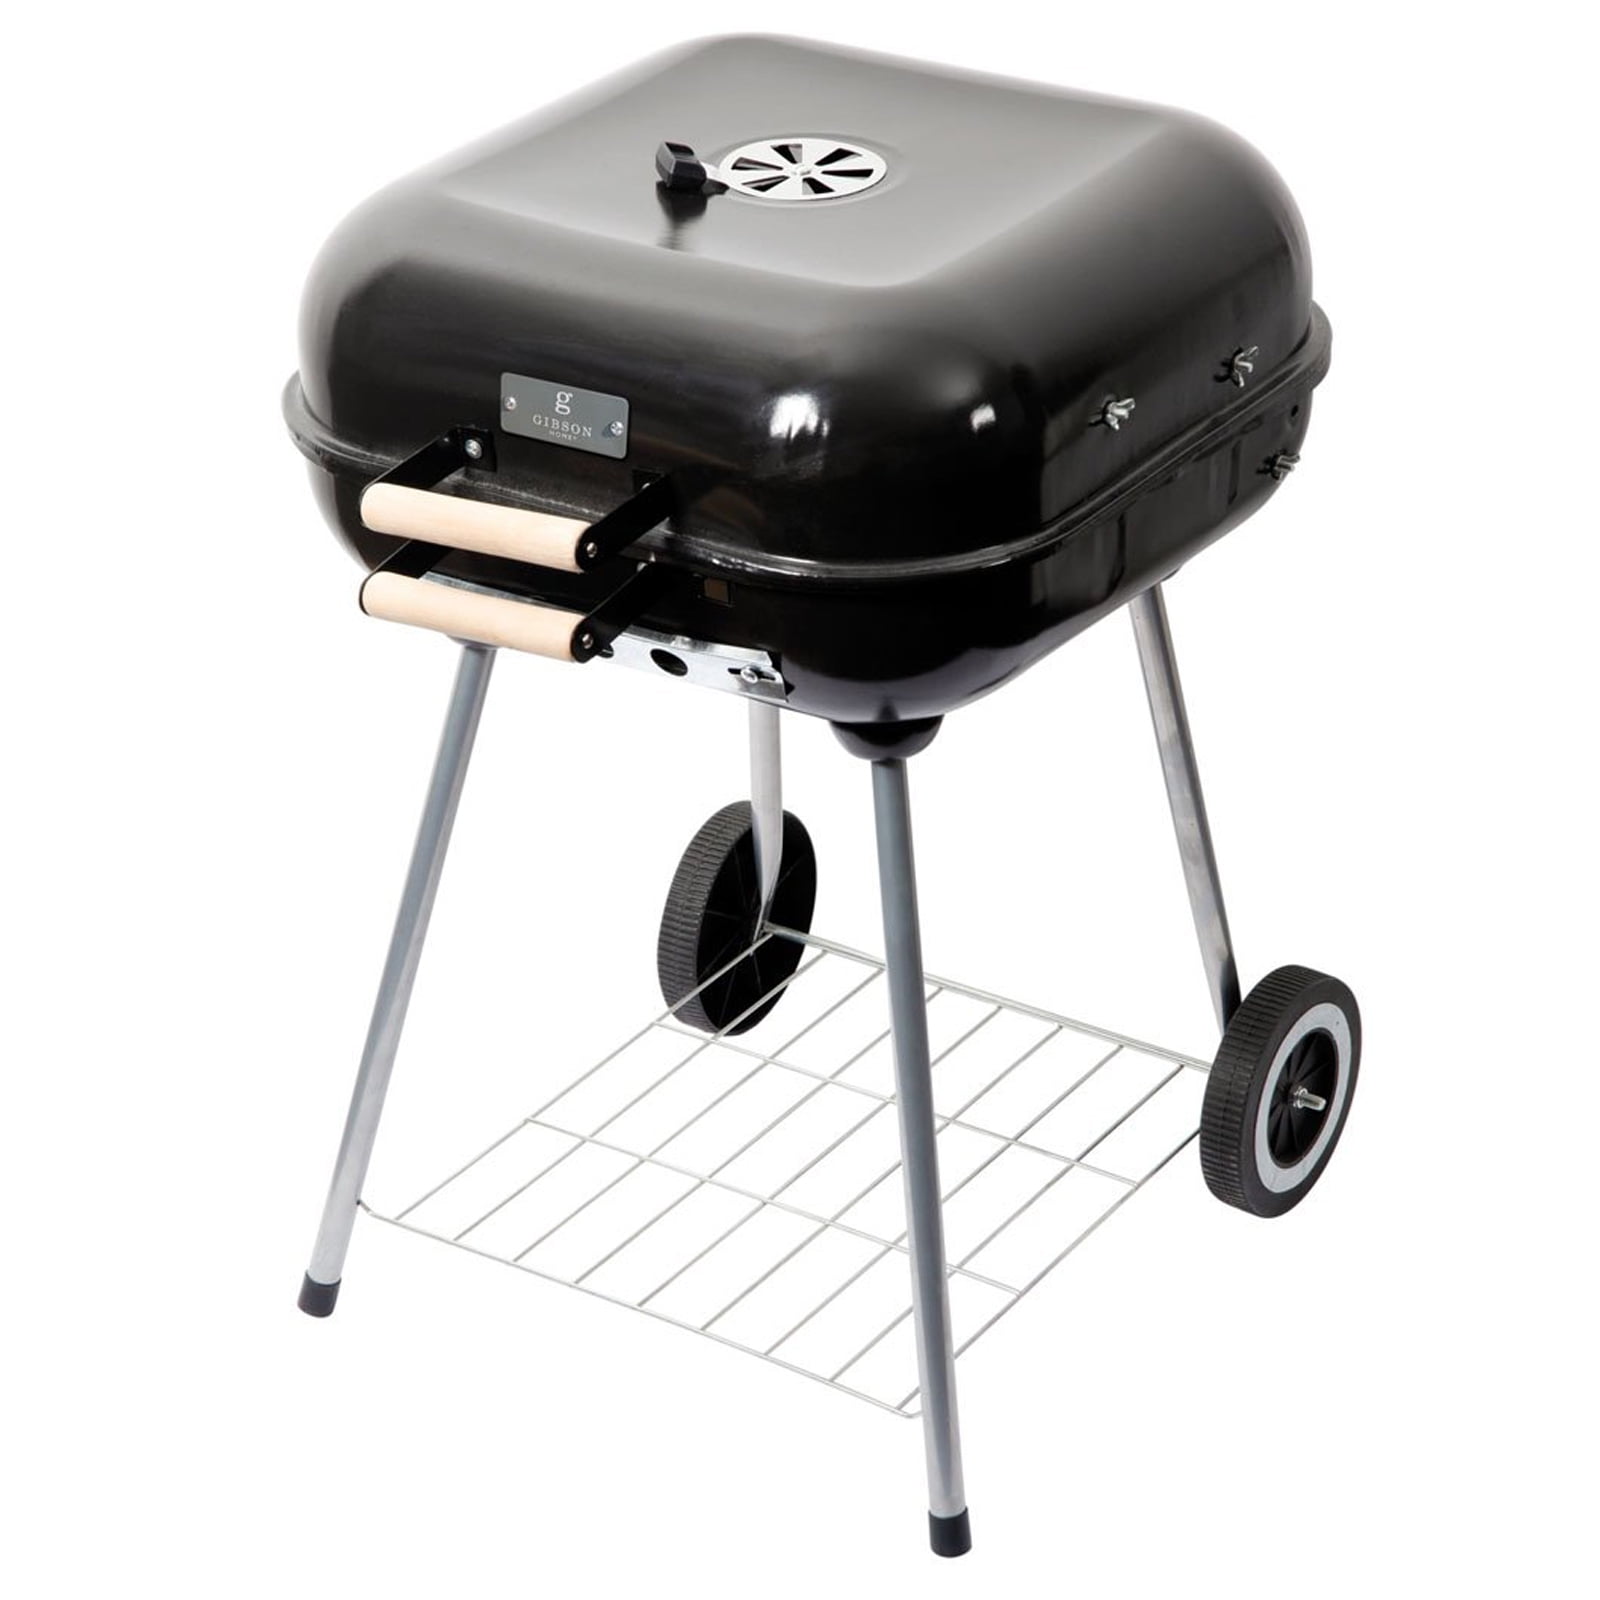 Space Grill 475 Inch Foldaway Steel Space Grill with Stand & Protective Cover